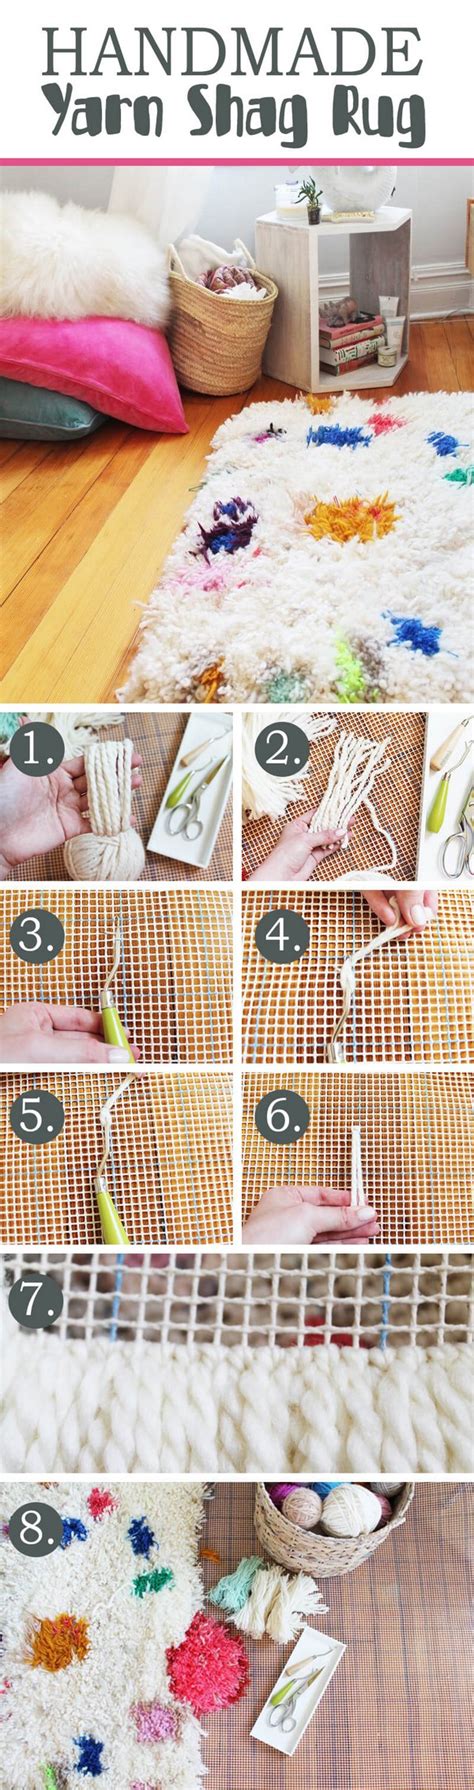 18 Exciting Weekend Diy Home Decor Projects For Making